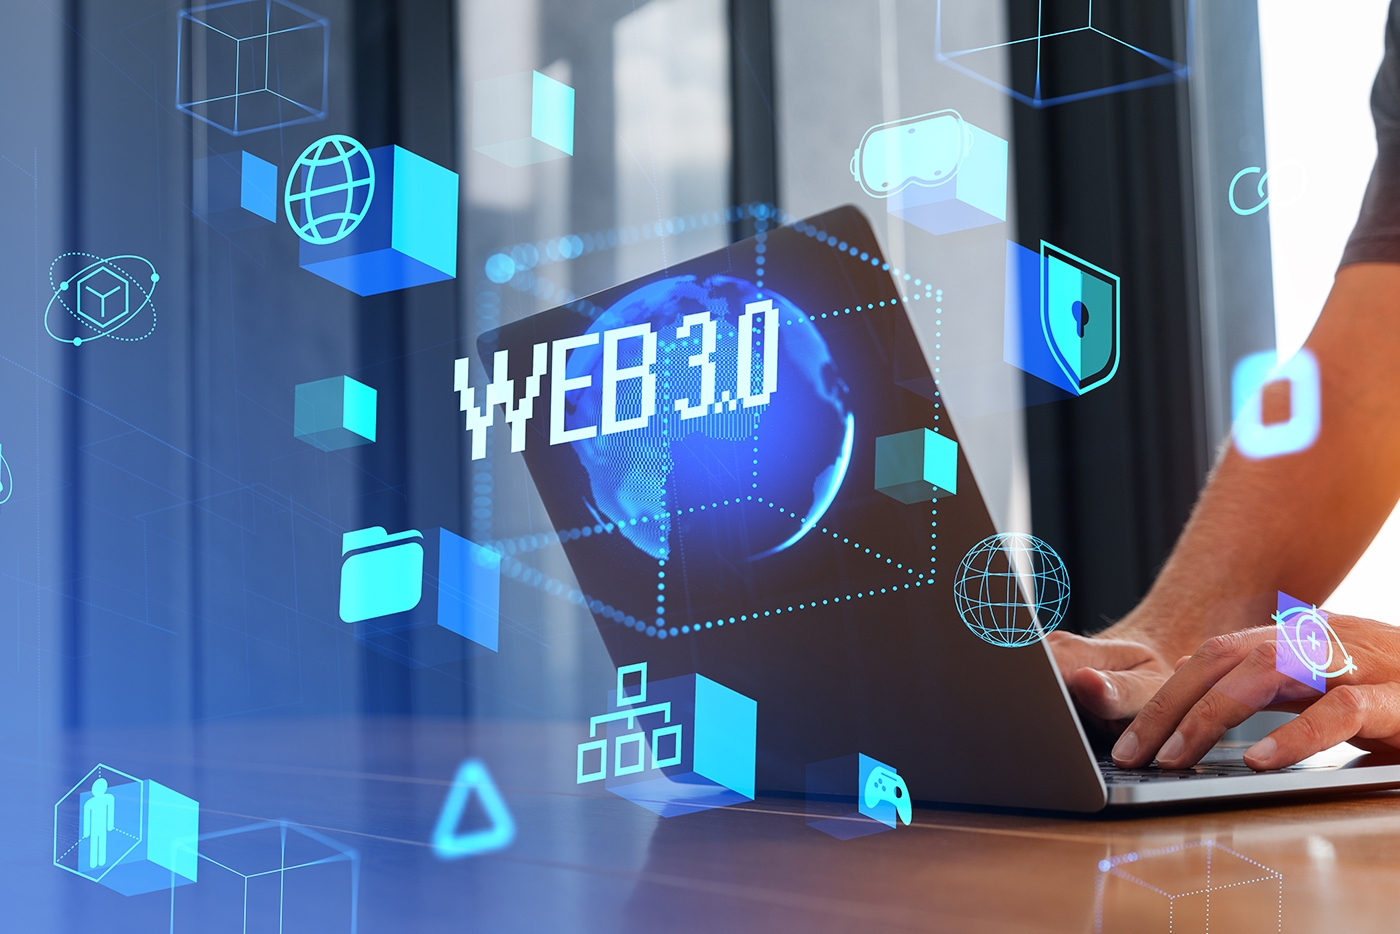 6 Roadblocks Stopping Web3 And The Metaverse Becoming A Reality | Bernard Marr